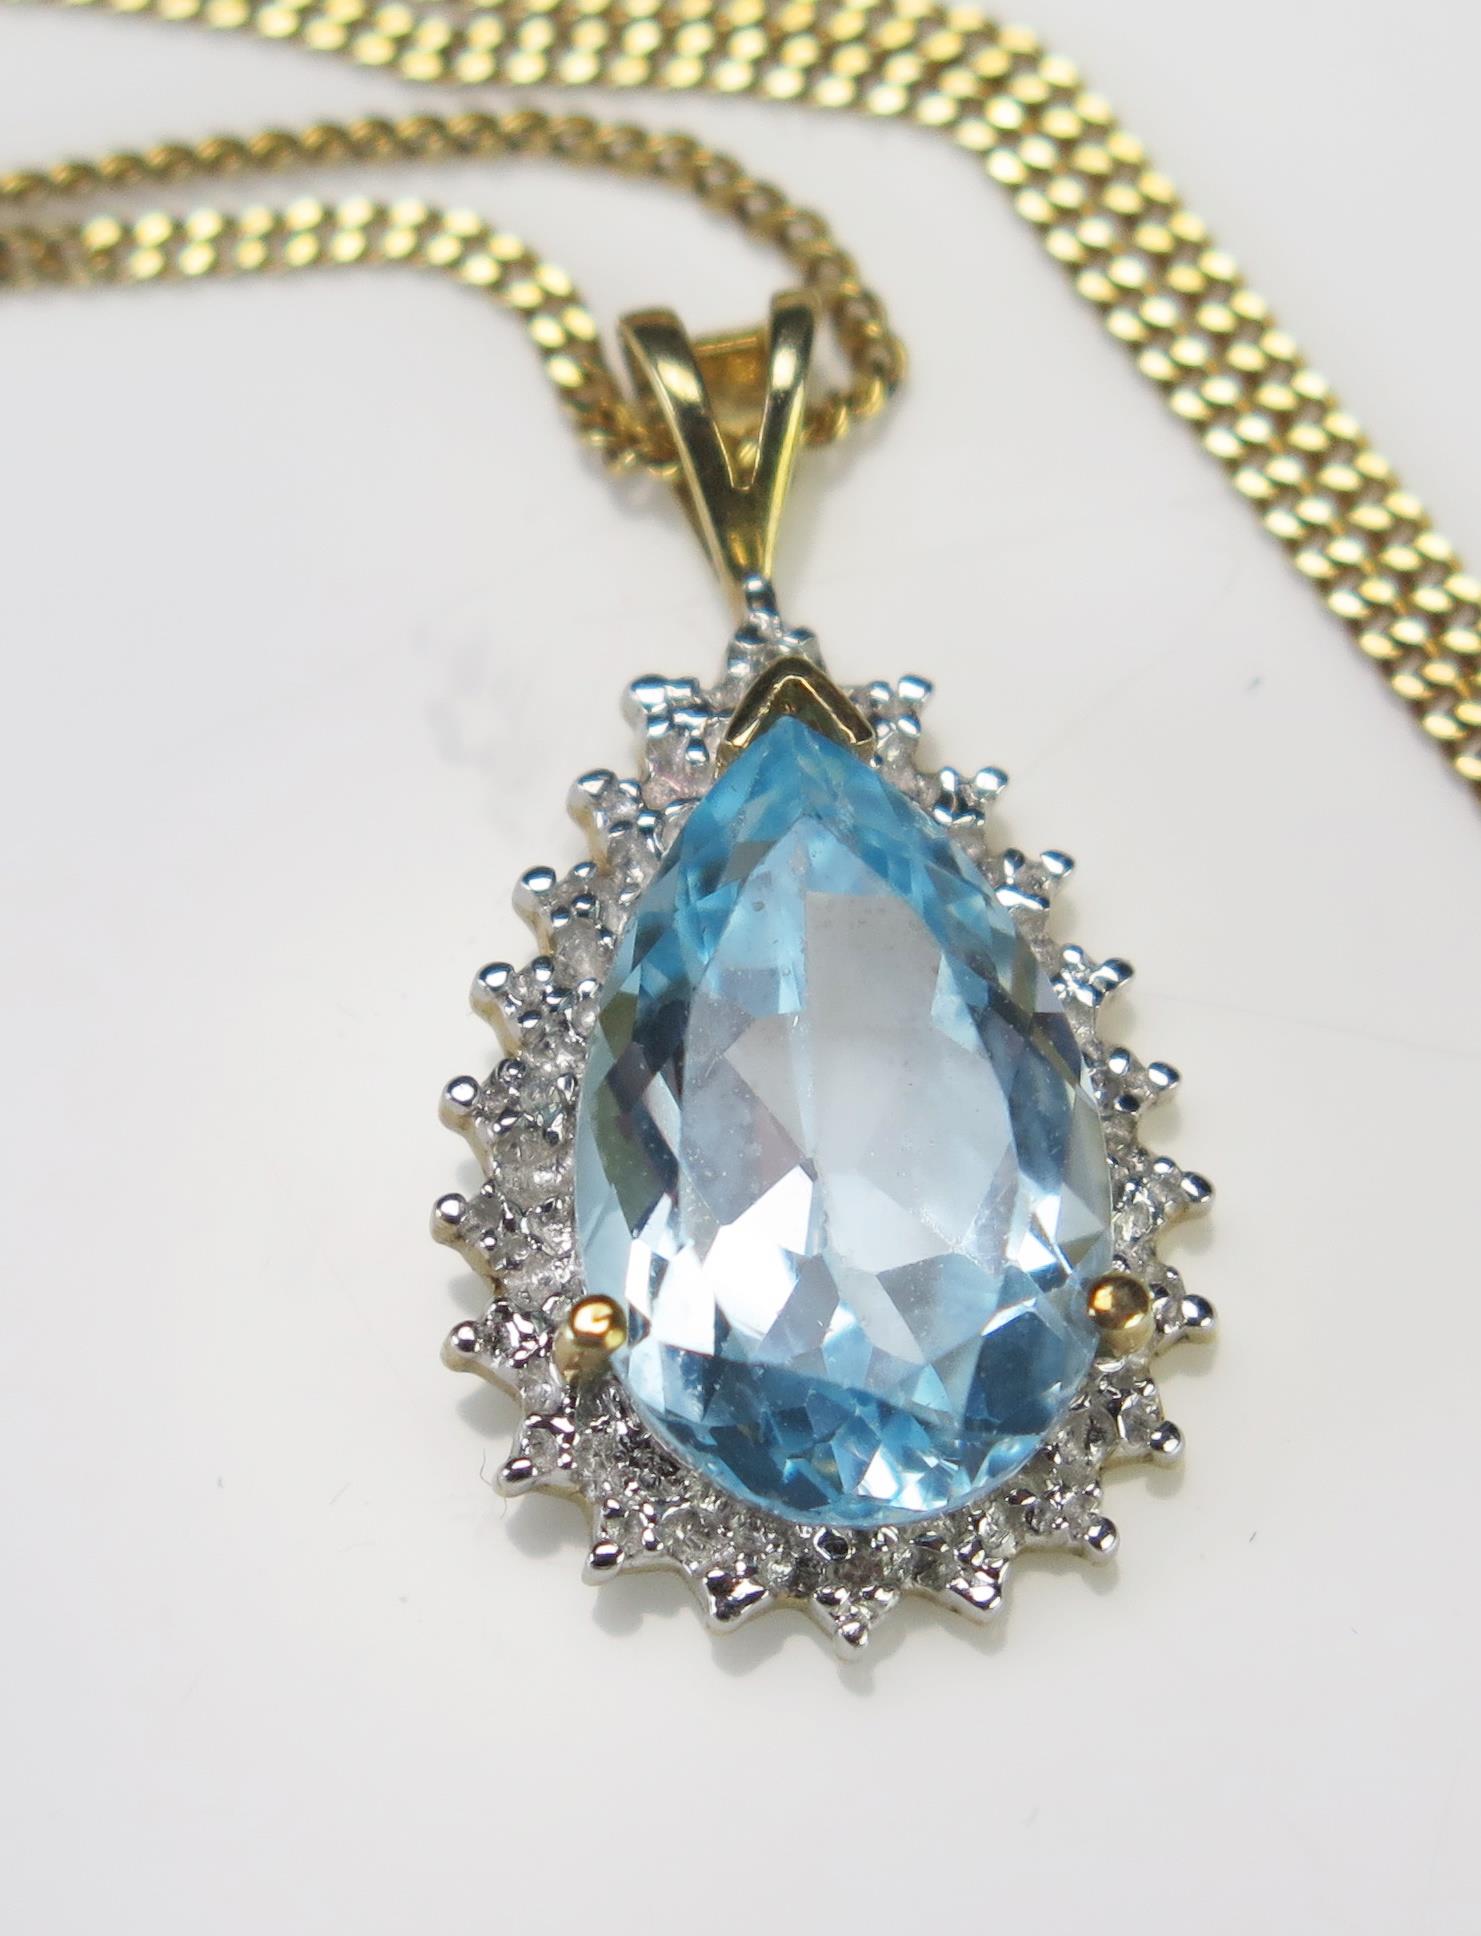 A Blue Topaz Tear Drop Pendant (24.3mm drop) on an 18" (46cm) 9ct gold chain, hallmarked, 2.57g - Image 2 of 2